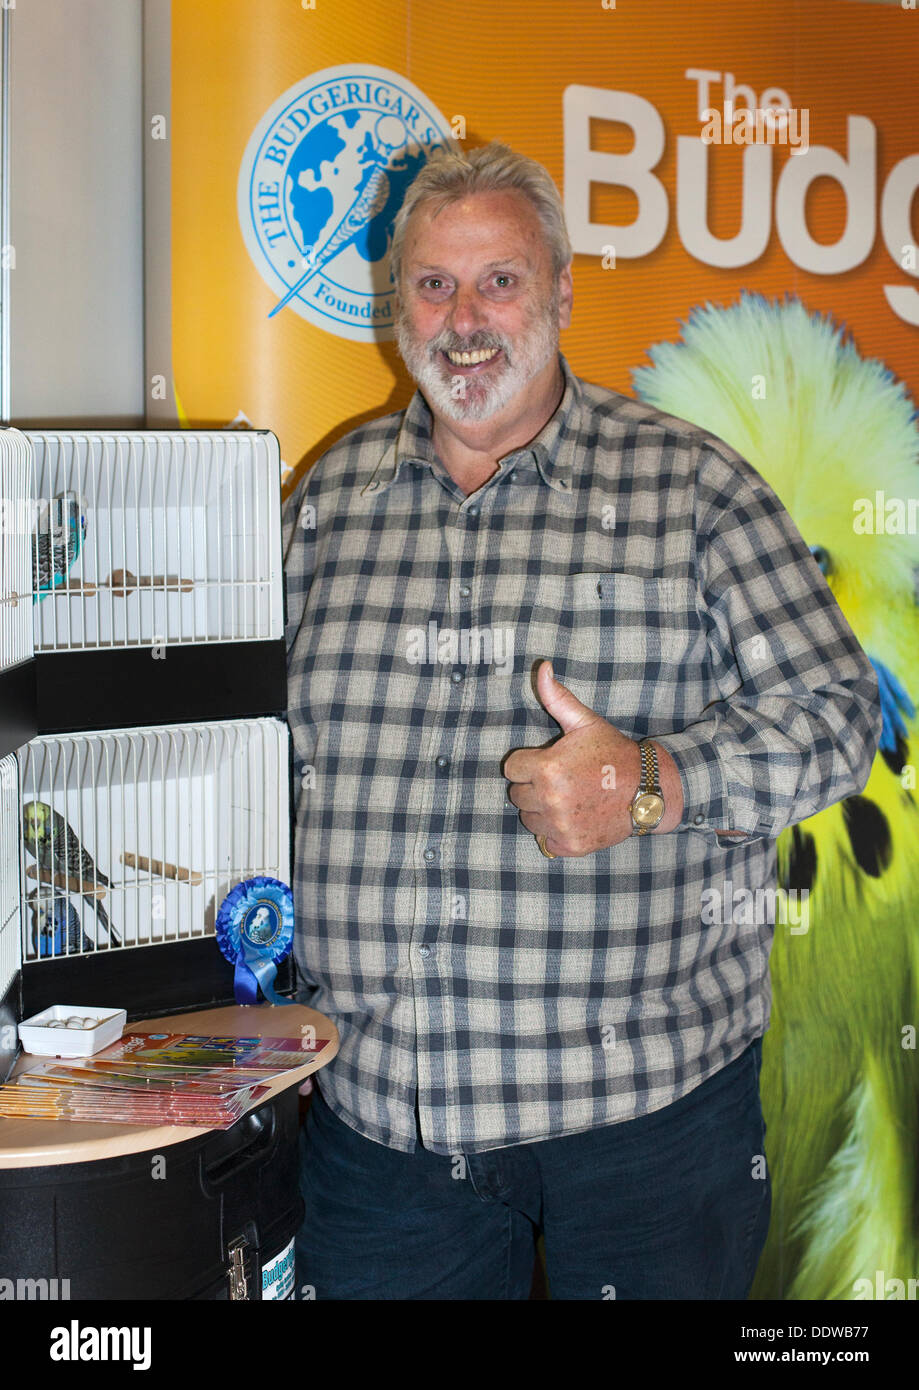 Manchester, UK, 7th September, 2013.  Geoffrey Lewis Capes, Geoff Capes at the Manchester Pet Show, Manchester, United Kingdom. EventCity held the North West's first ever pet show, The inaugural two-day event included Feather & Scales,  pet displays, animal educational, retail outlets and an impressive theatre with an action-packed schedule featuring stars of TV’s Animal Planet. Stock Photo